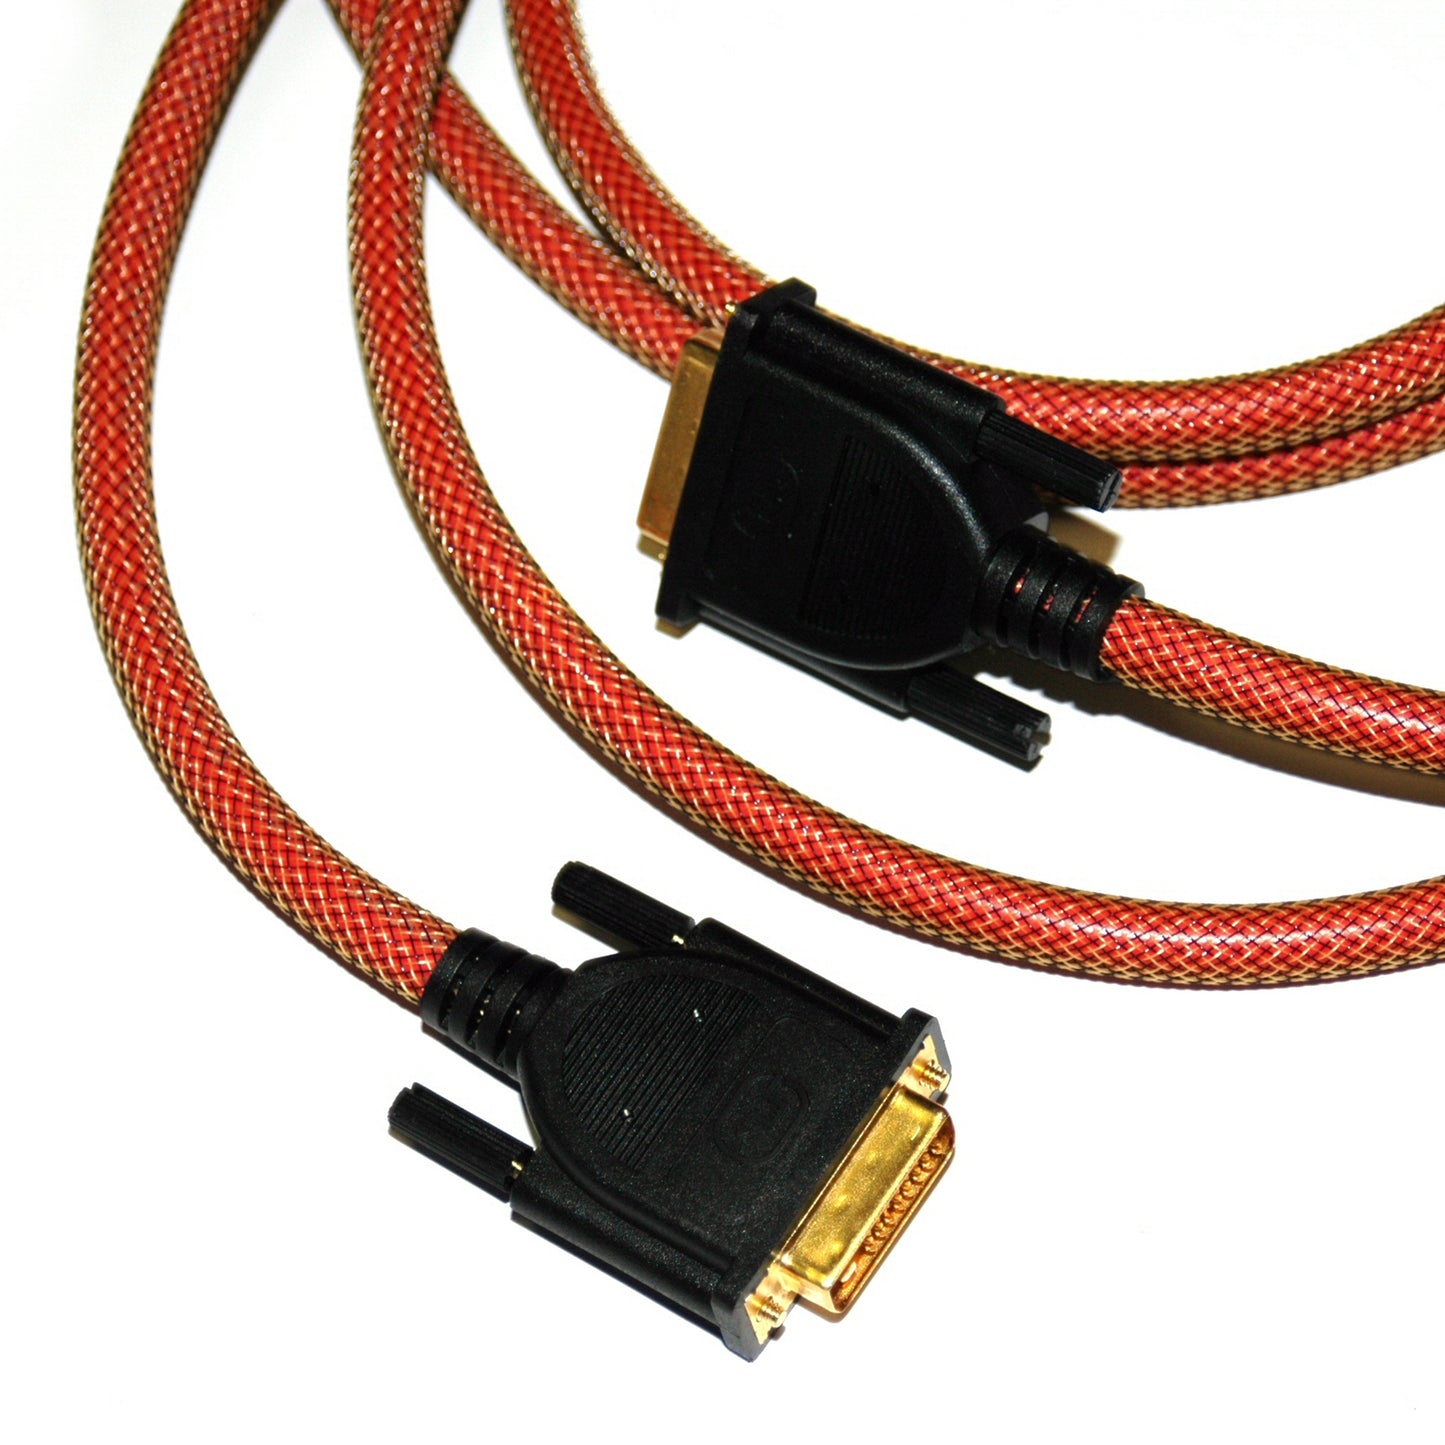 Nordost Wire Wizard DVI-D Cable (OPEN)